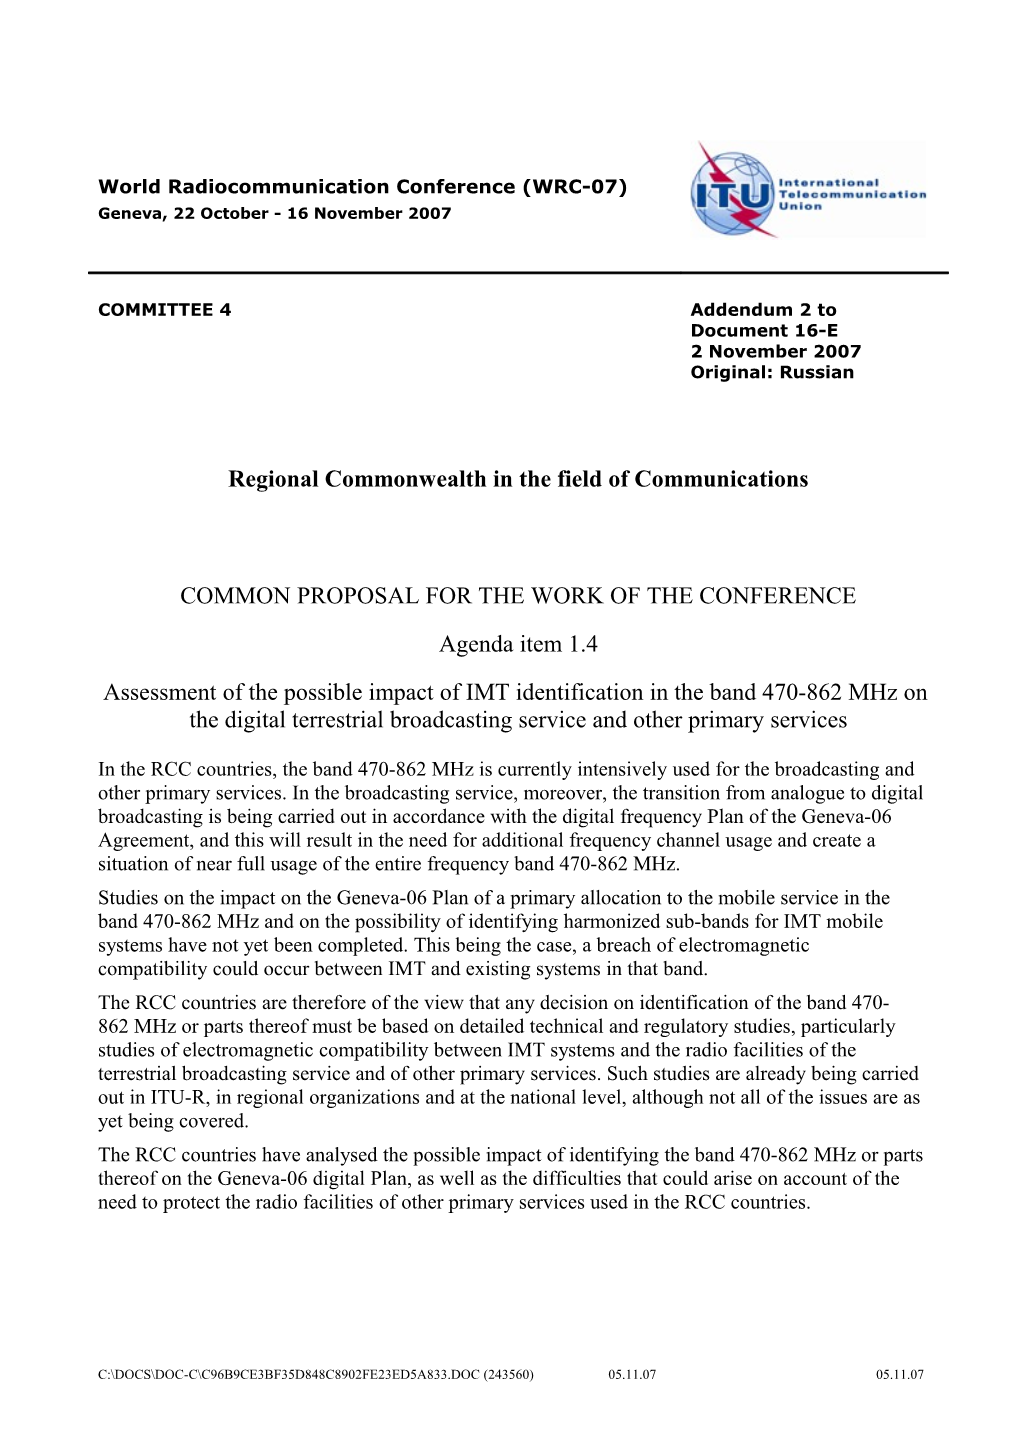 COMMON PROPOSAL for the WORK of the CONFERENCE: Agenda Item 1.4